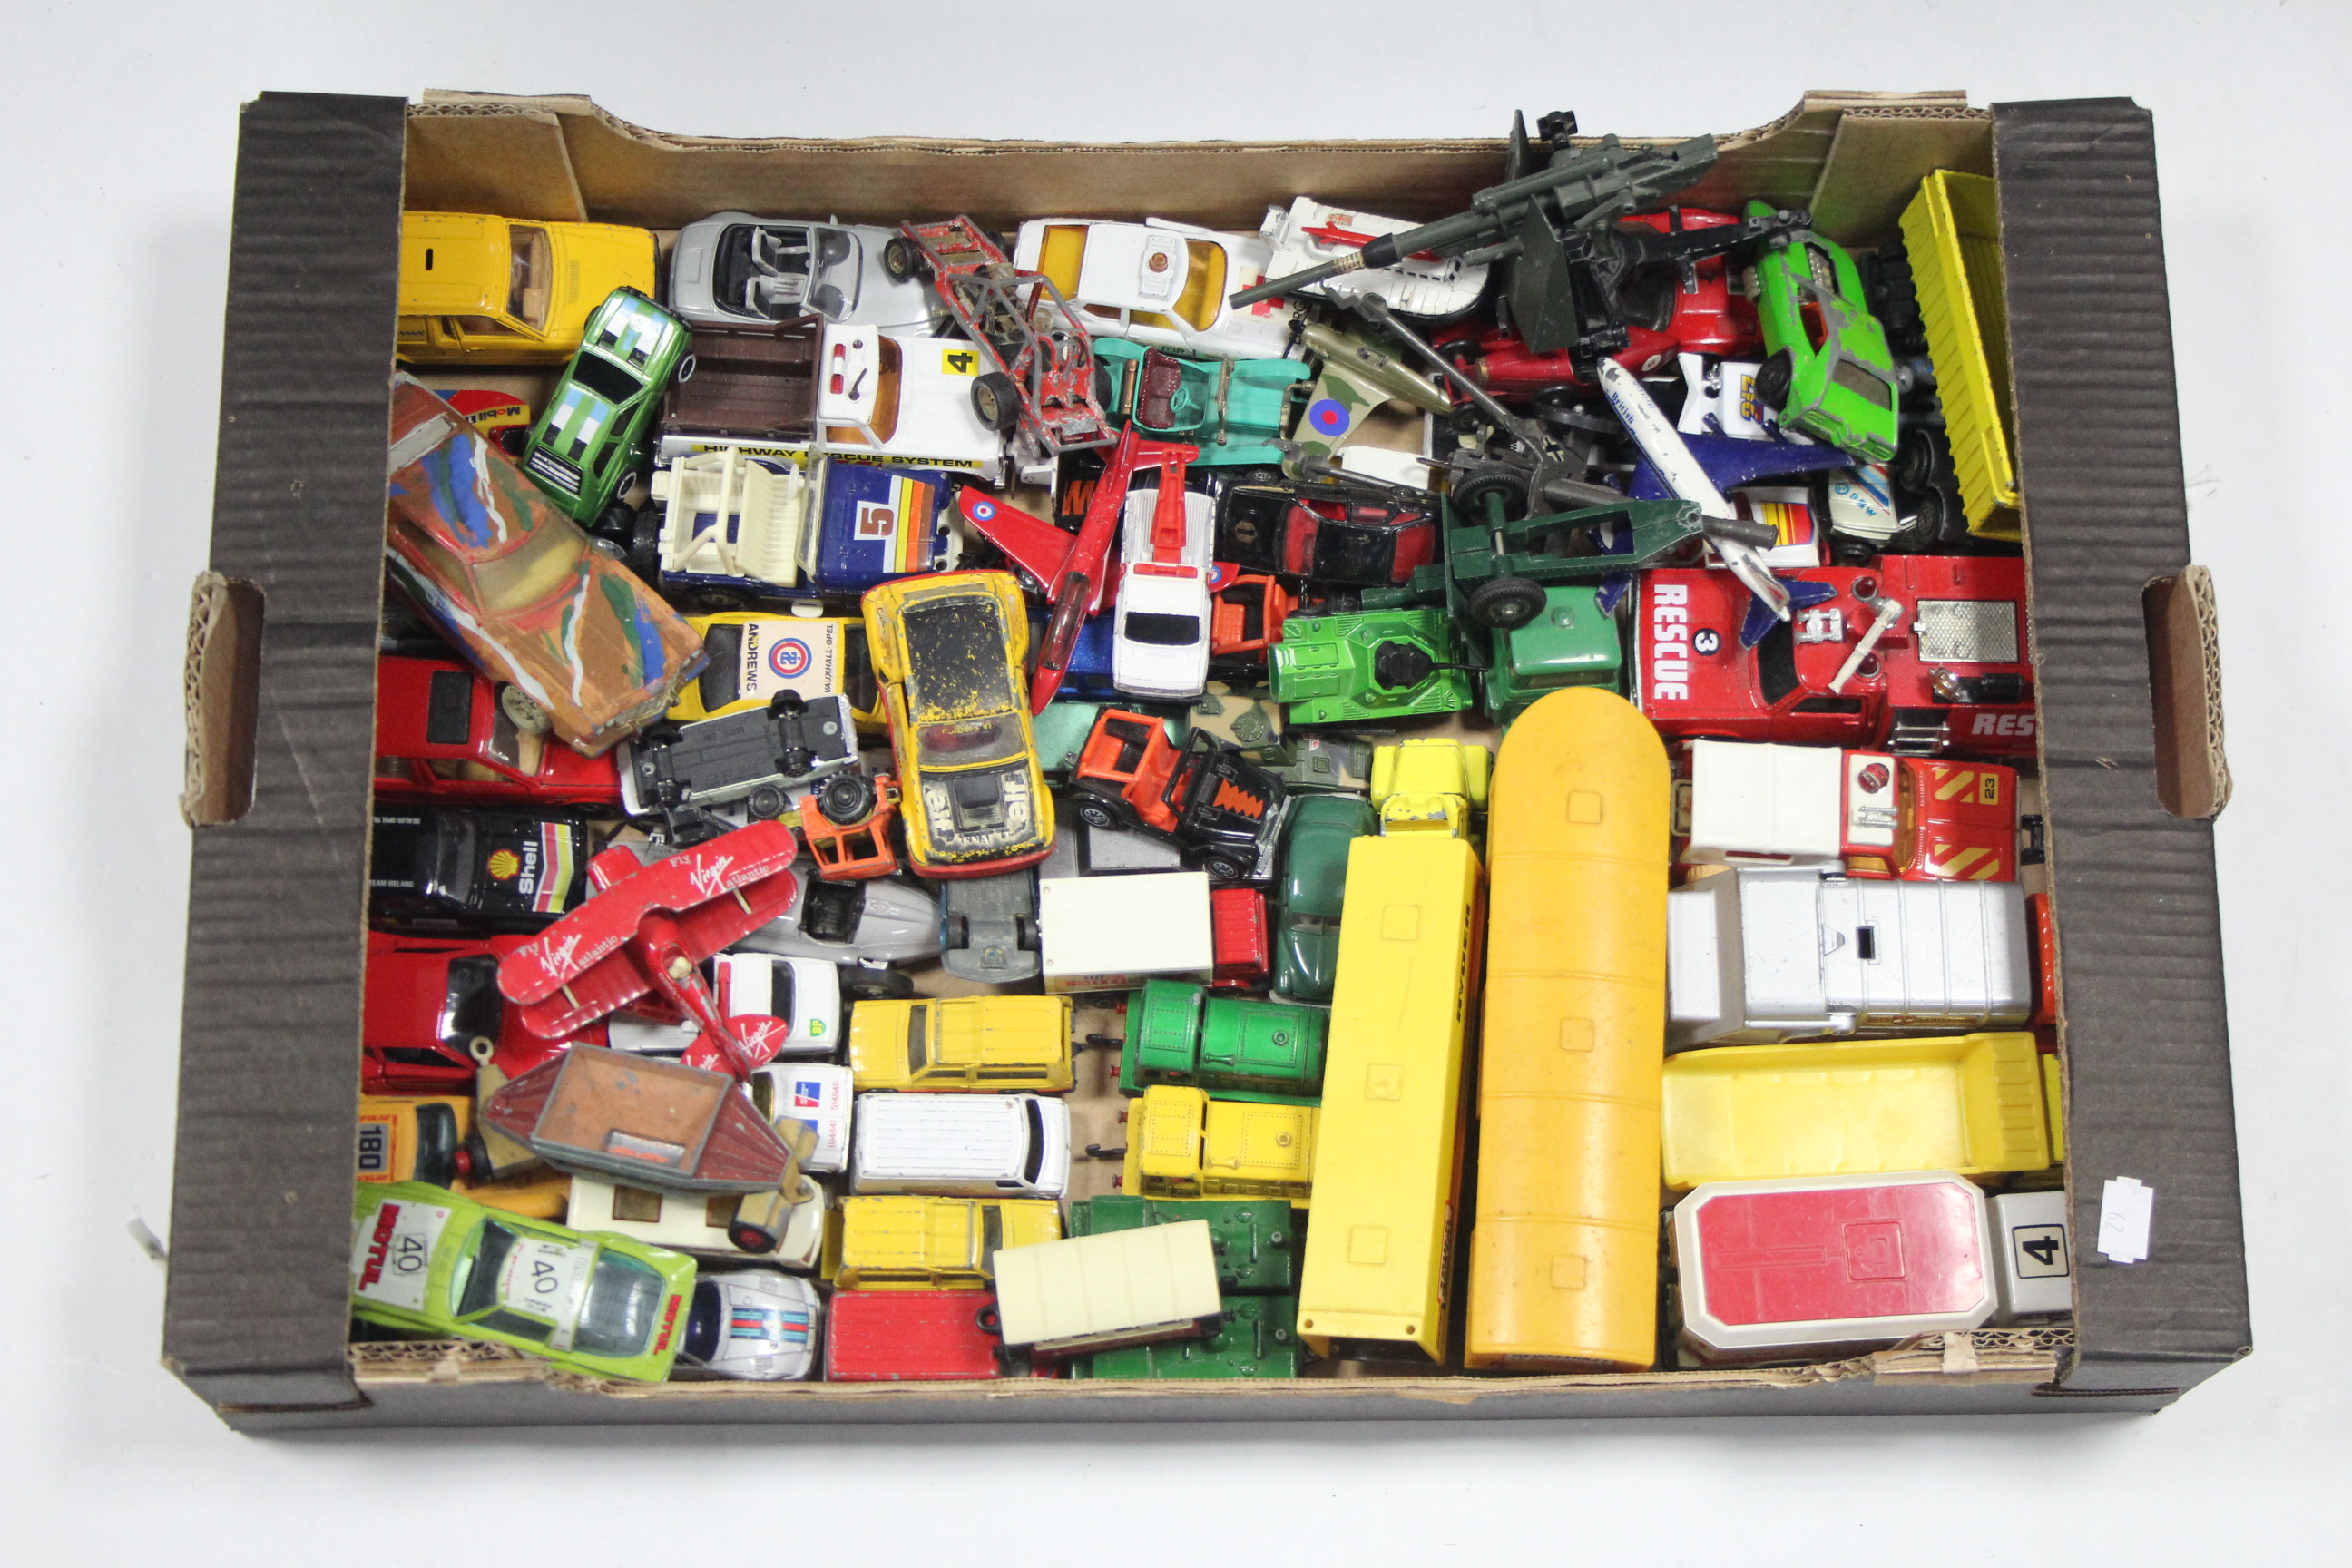 Approximately fifty various scale models by Britains, Corgi, Matchbox, etc., boxed & un-boxed. - Image 2 of 2